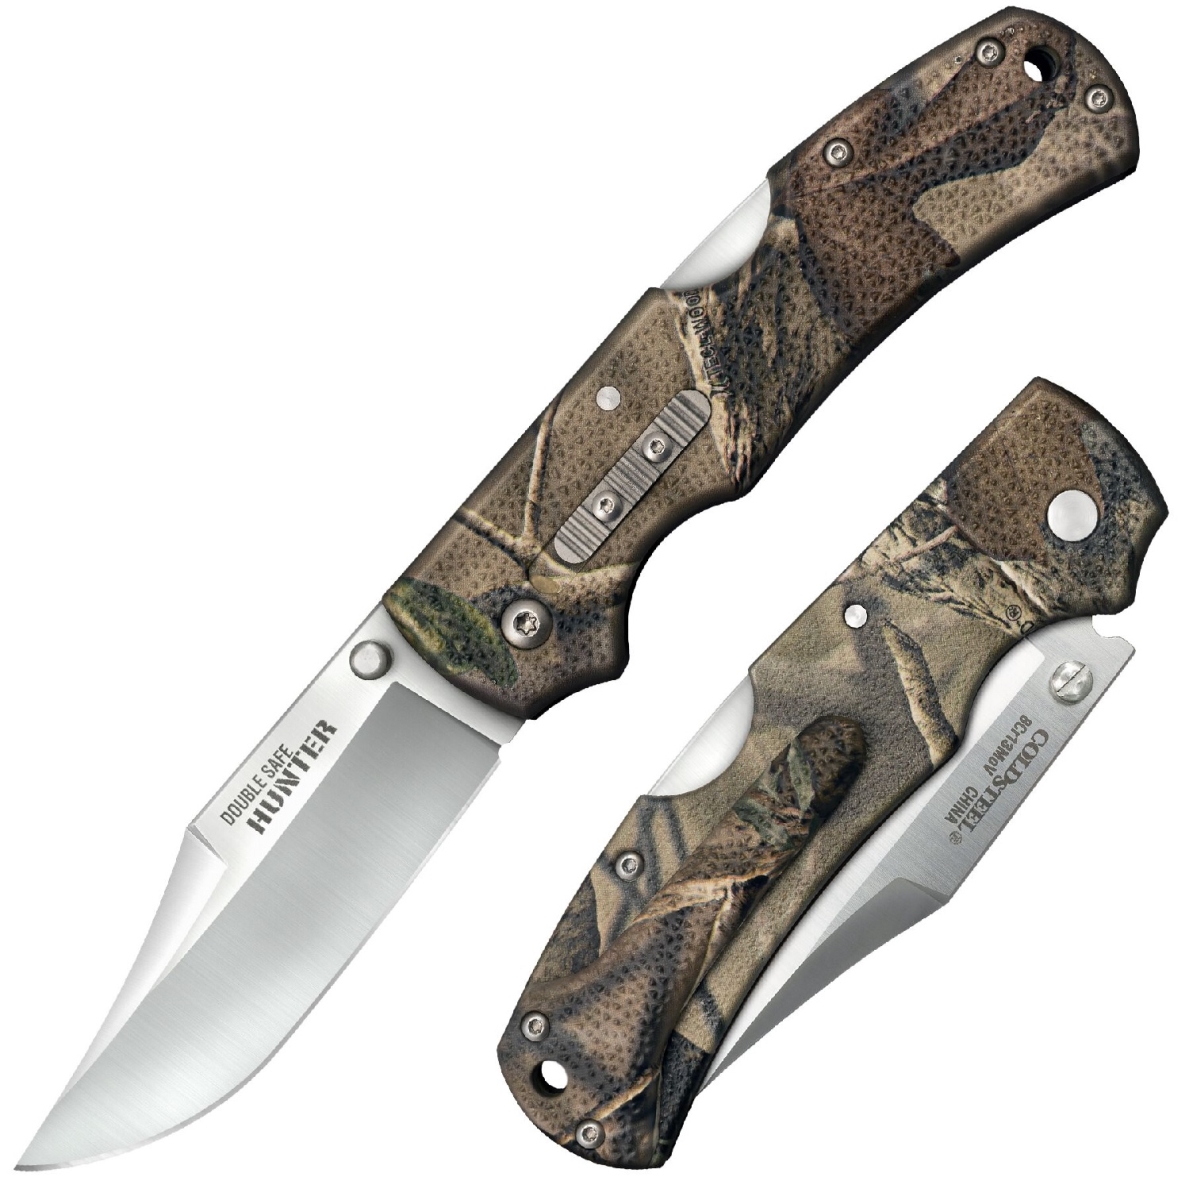 Cold Steel 4019620 3.5 in. Double Safe Hunter Folder Blade with GFN Handle